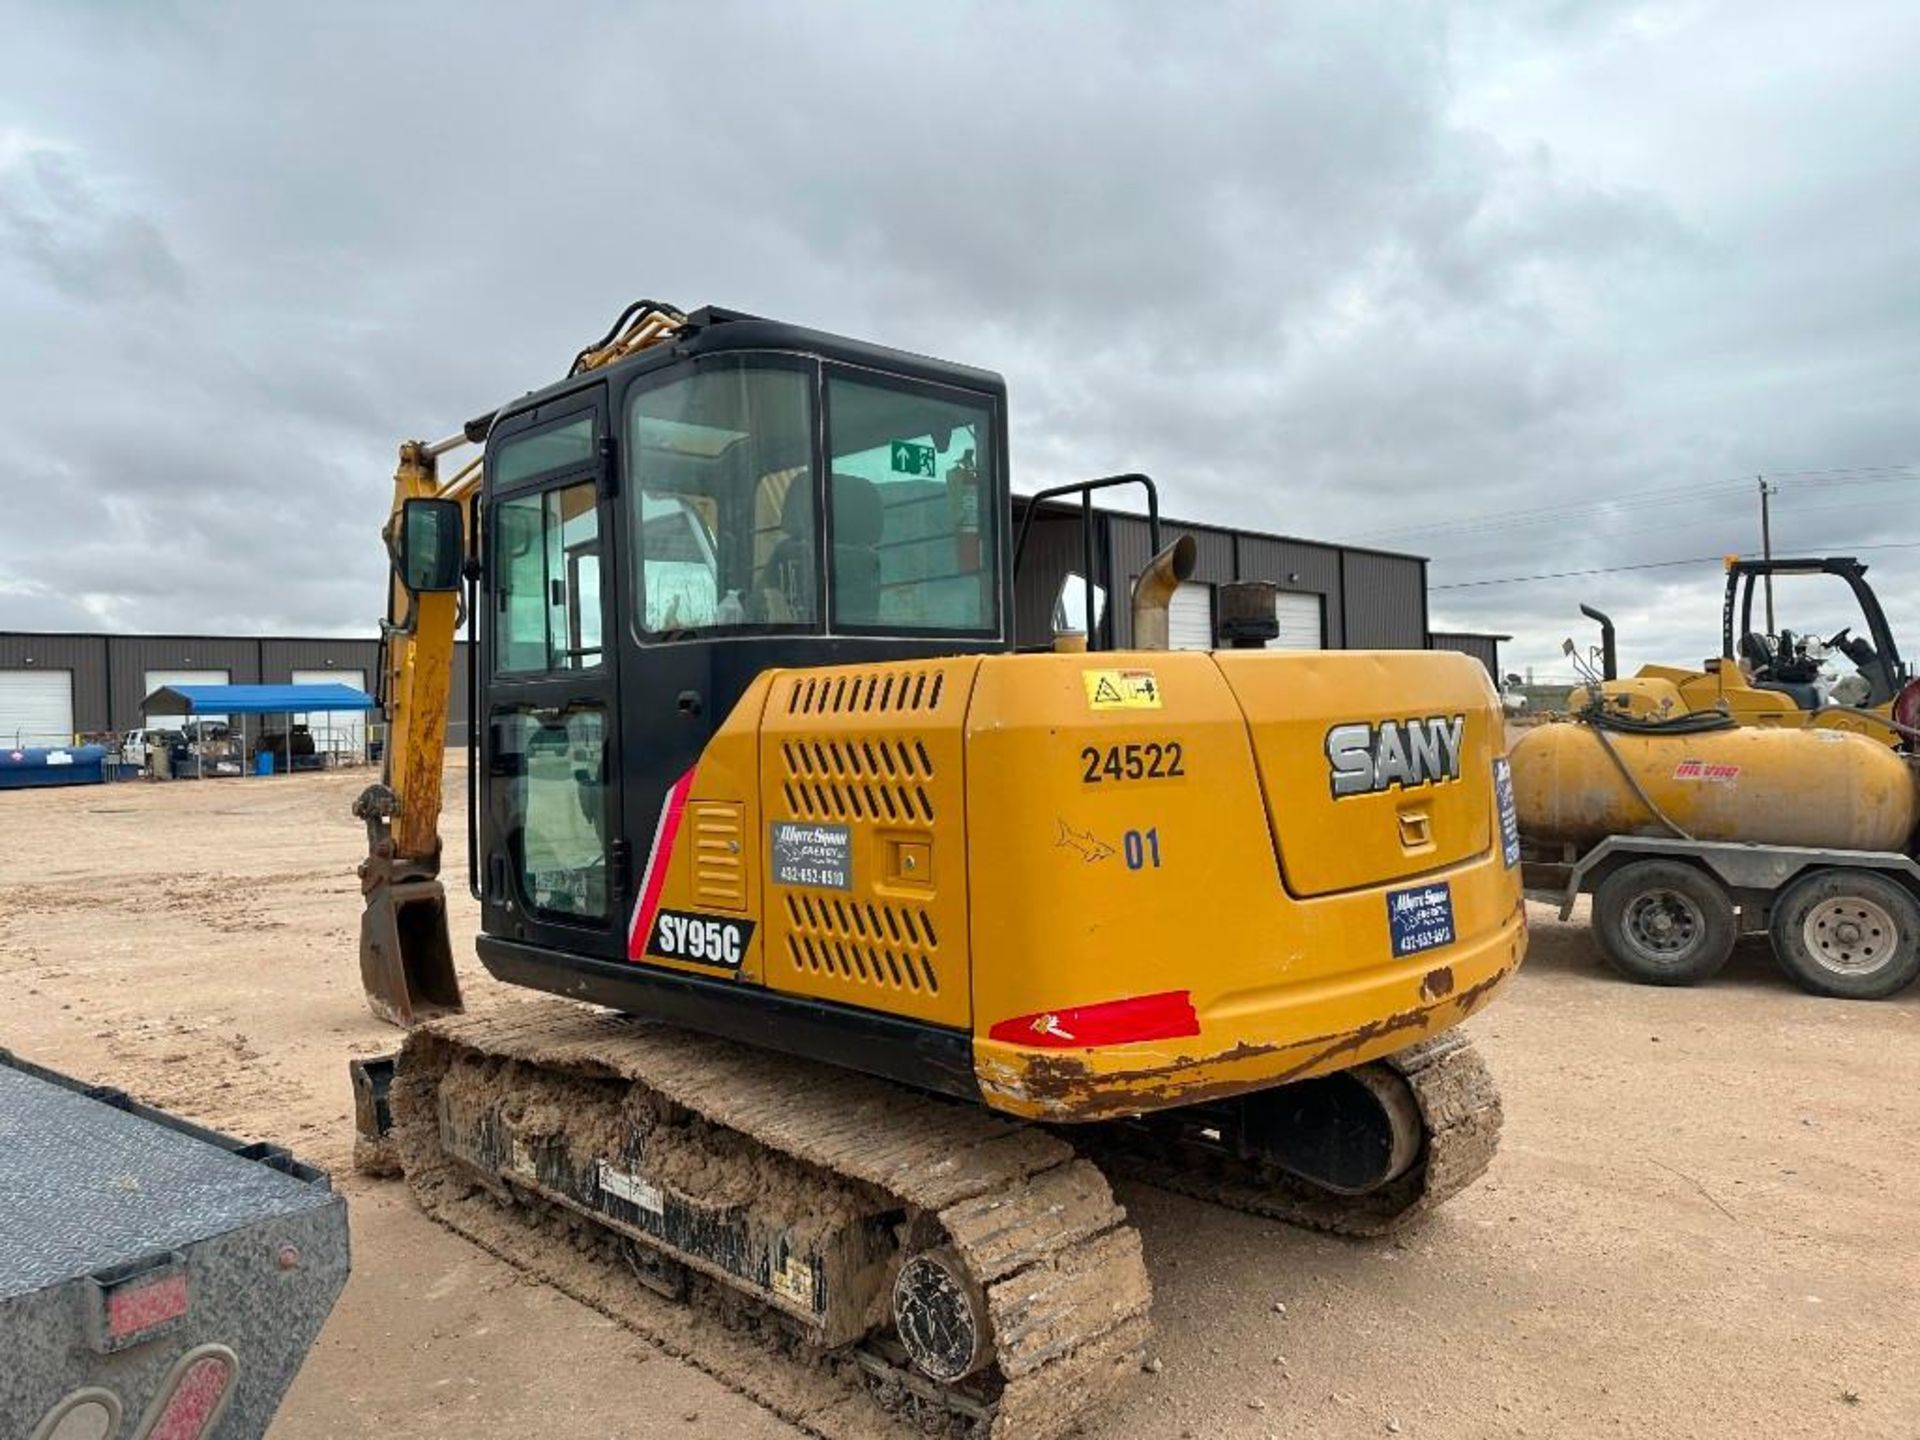 2019 Sany SY 95C Tracked Excavator, 2,309 Hours, 12" Tooth Bucket, Enclosed Cab, Diesel Engine, 8' H - Image 2 of 7